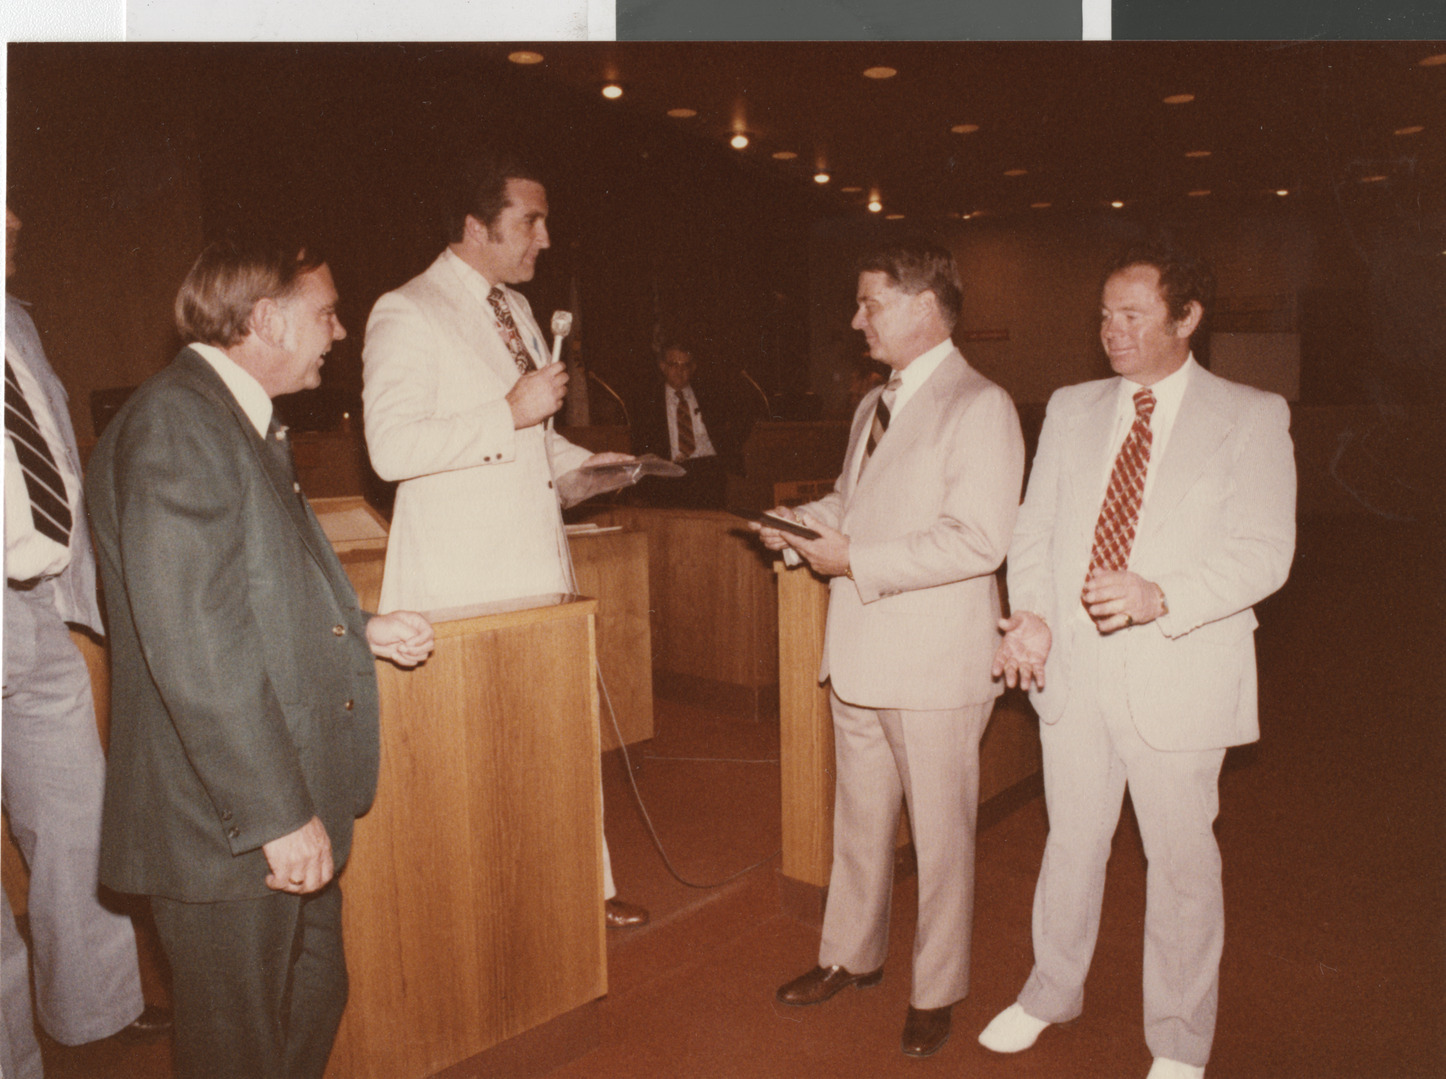 Photograph of Ron Lurie presenting a plaque in City Council chambers, circa 1978